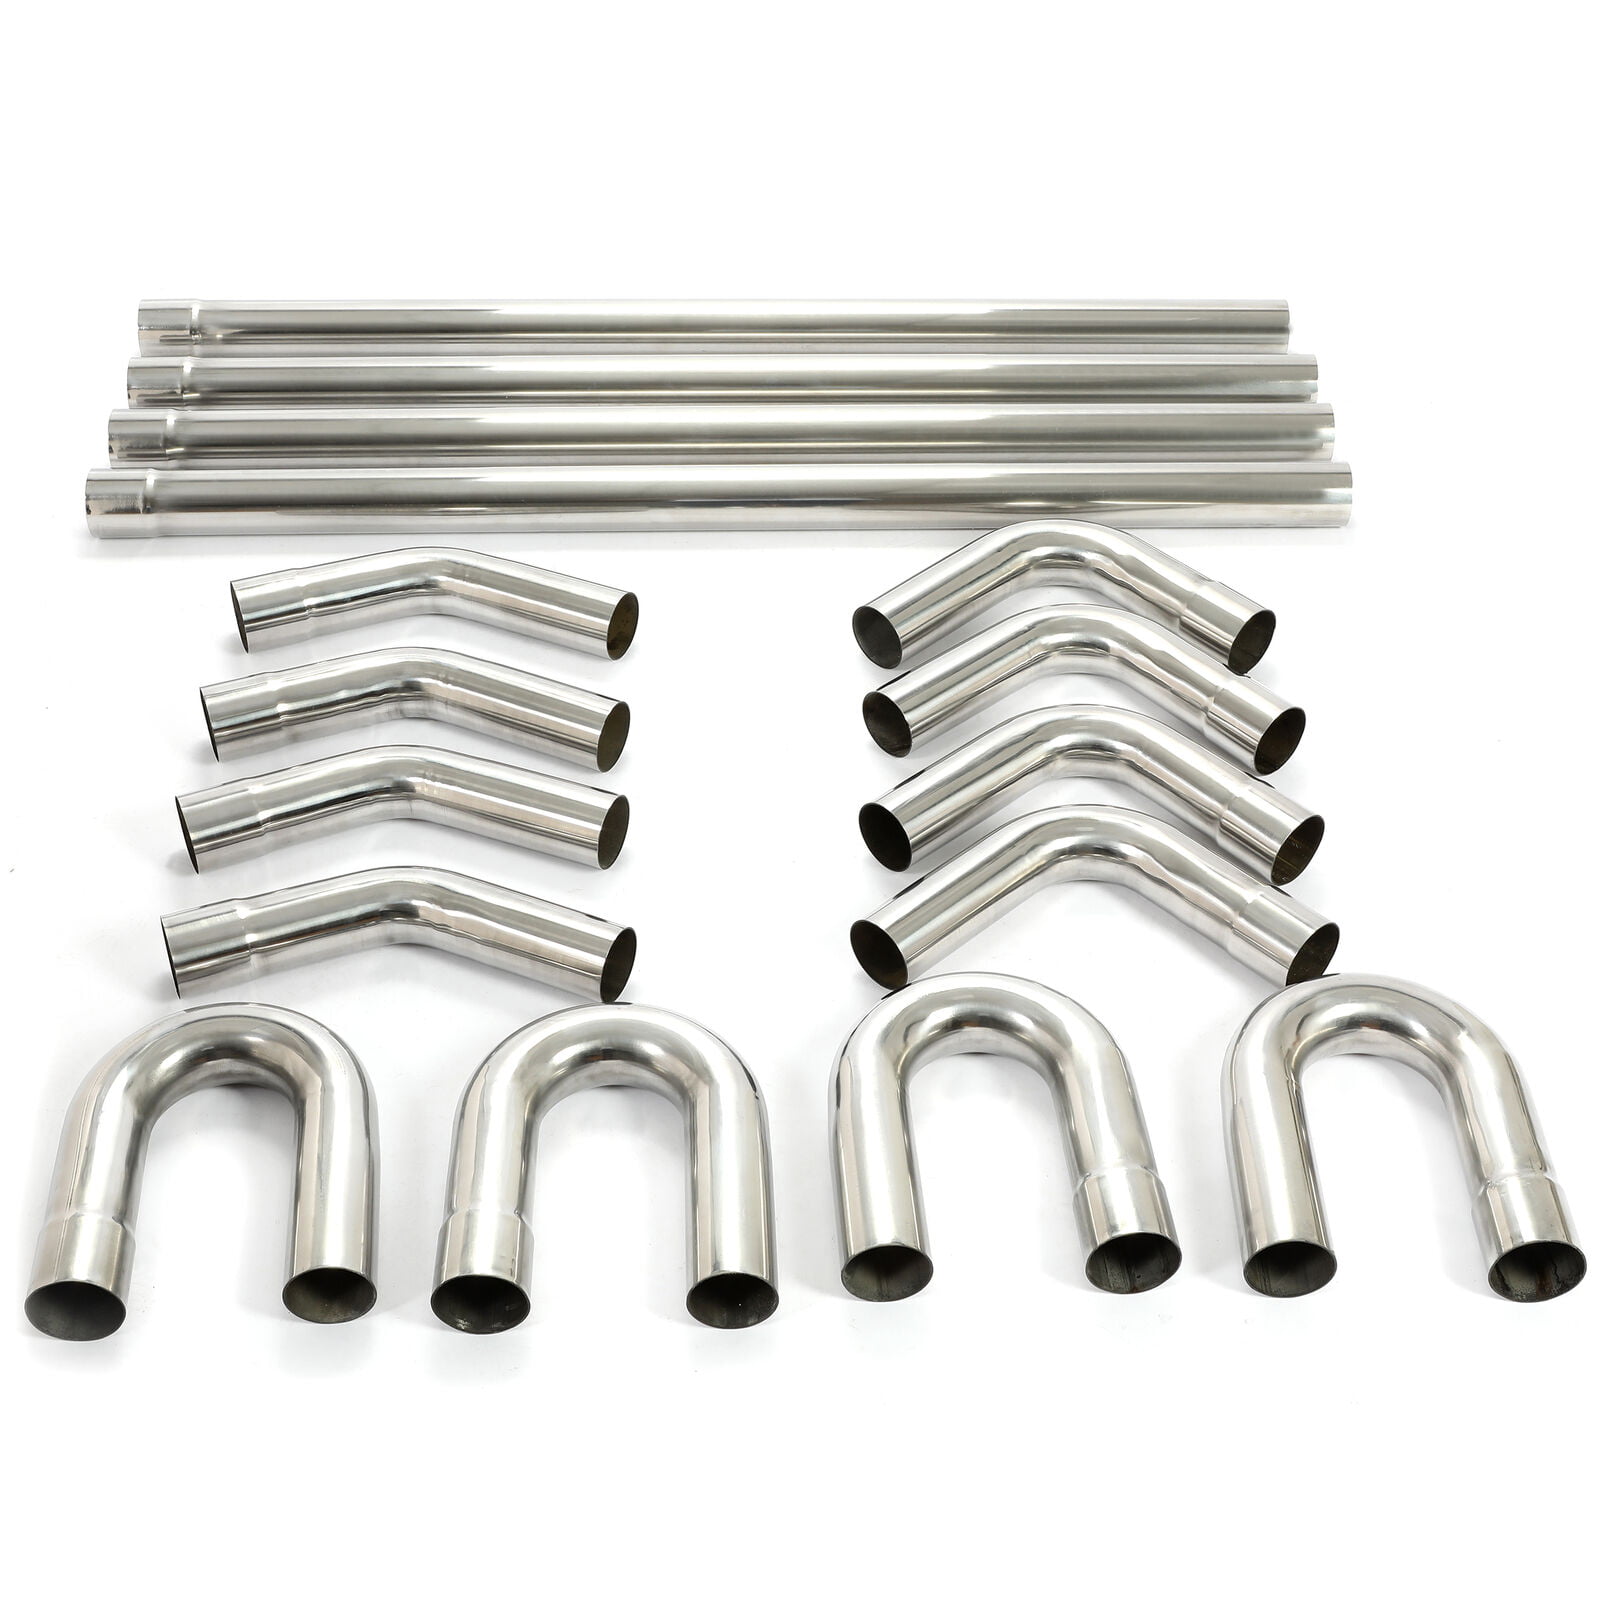 2.5 inches OD Stainless Steel DIY Custom Mandrel Exhaust Pipe Kit 16-Piecese Straight & U-Bends 